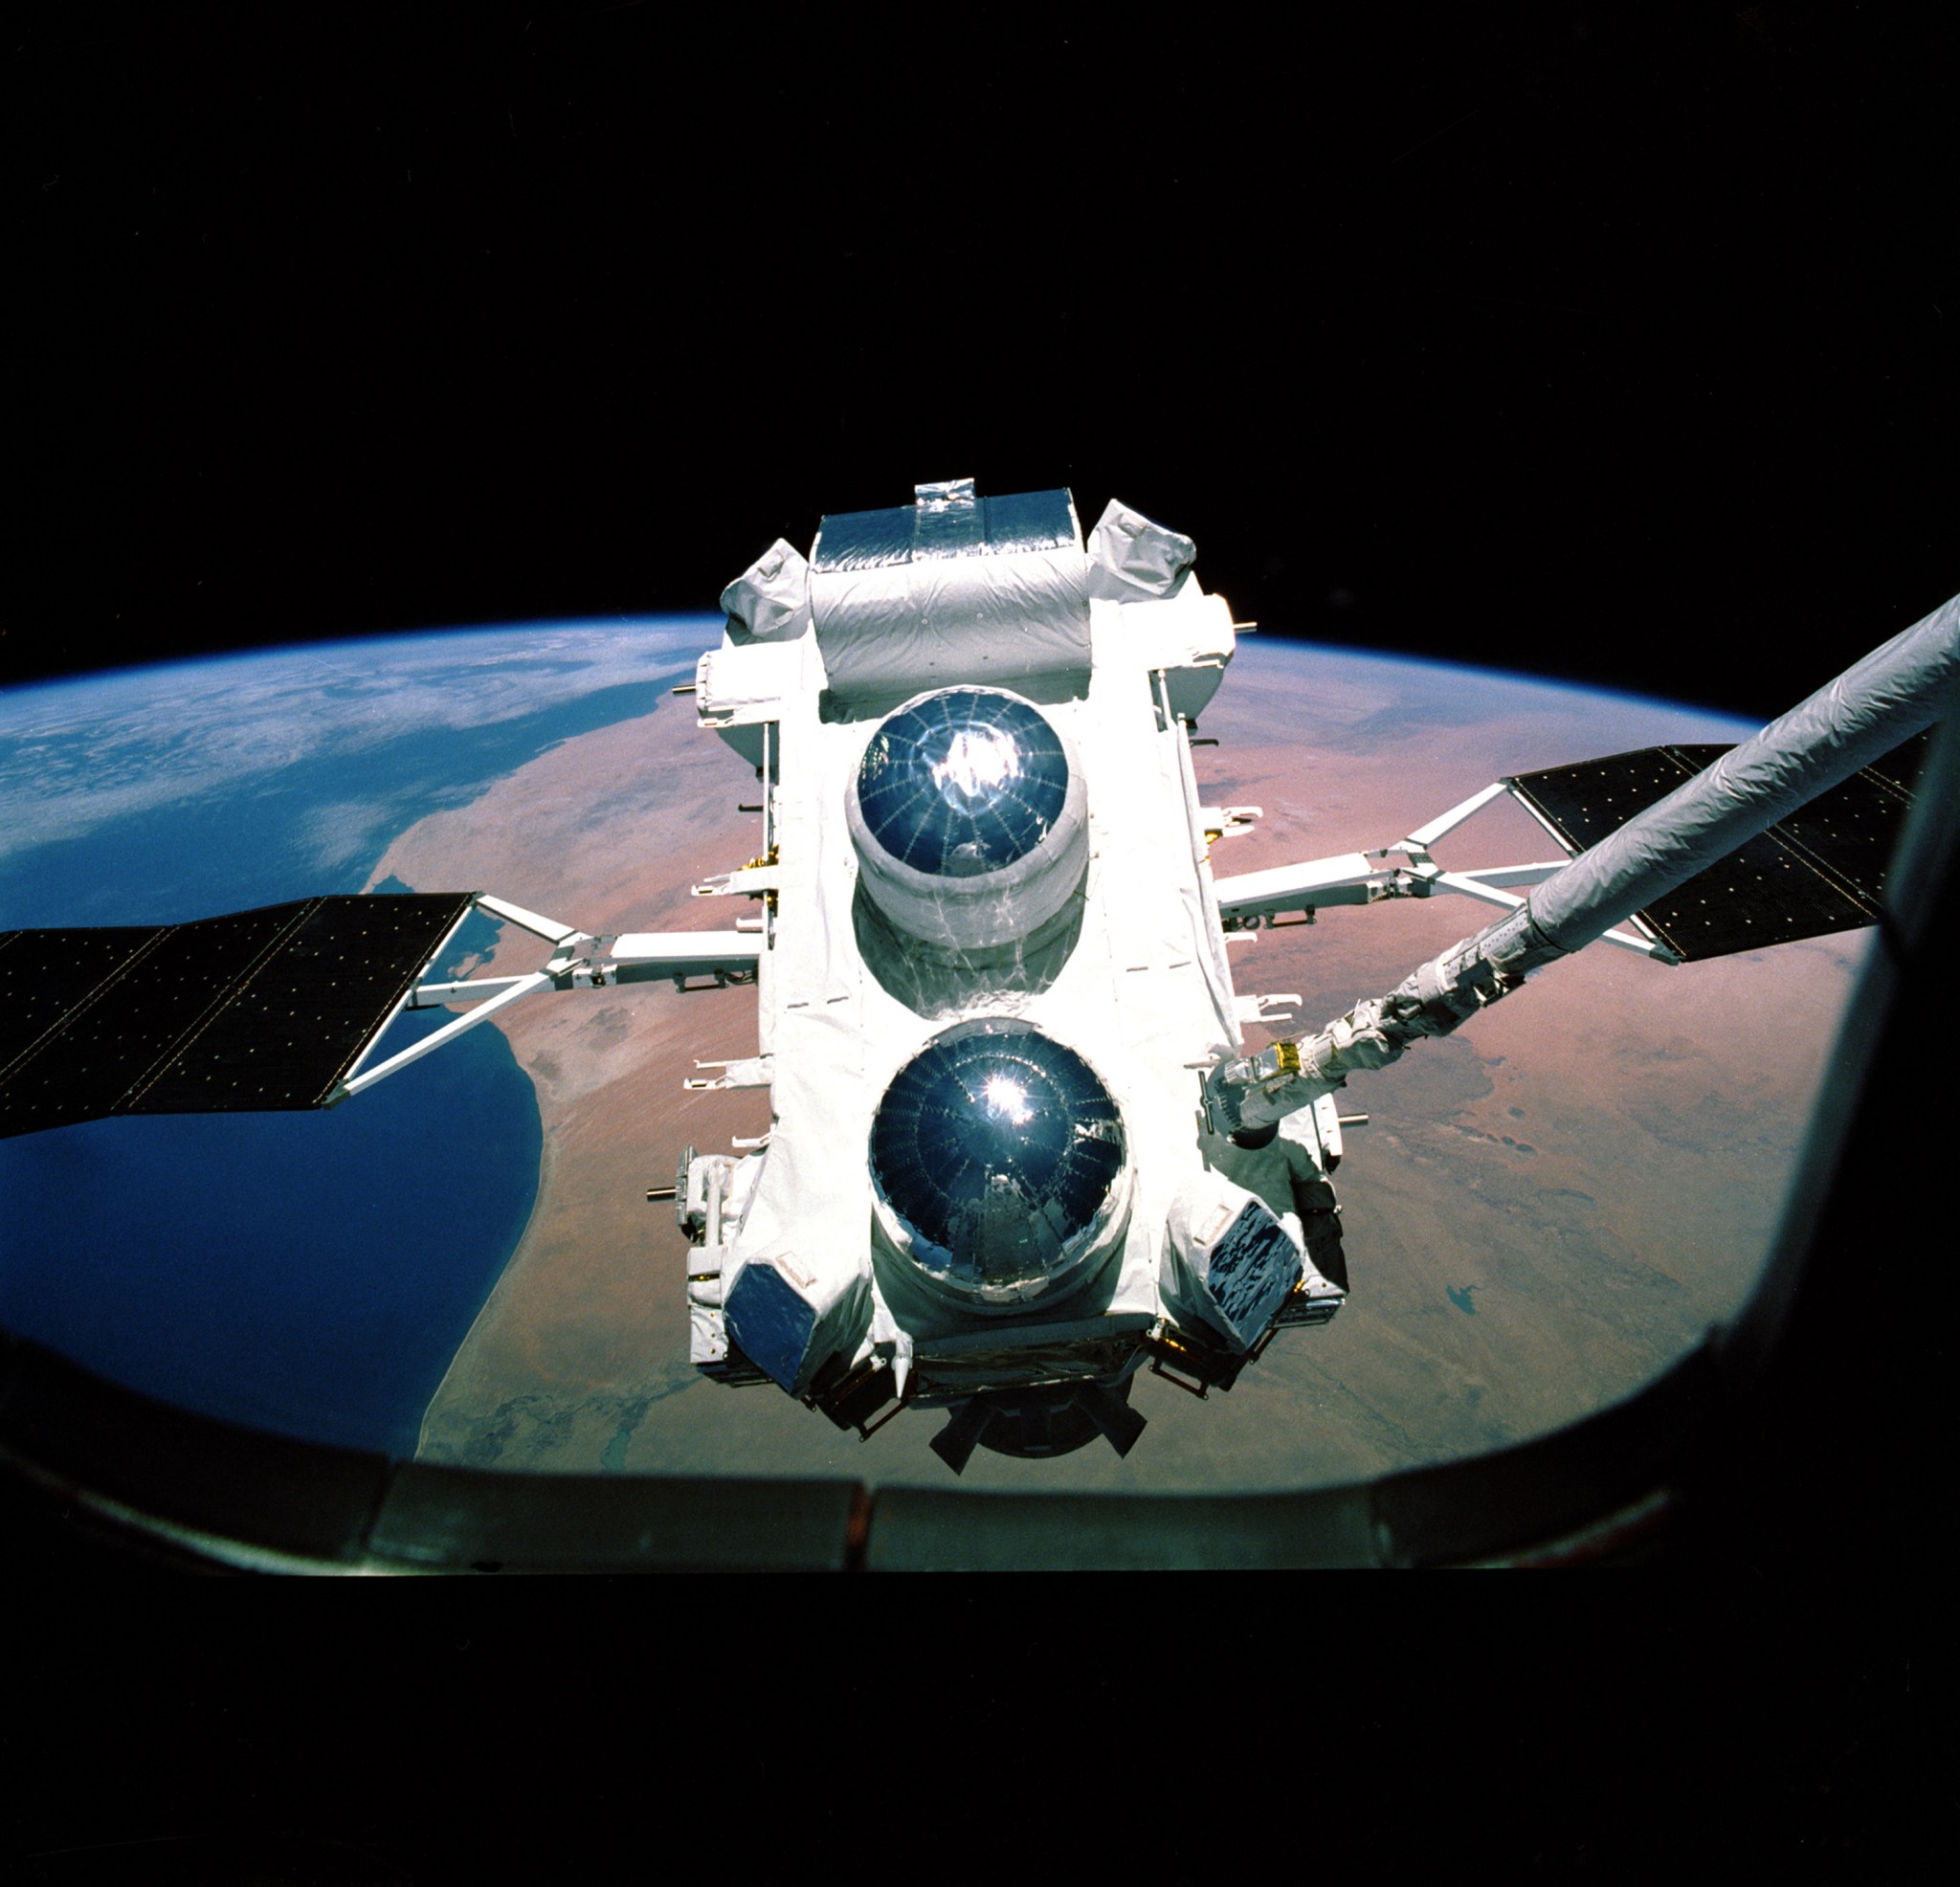 A white, rectangular spacecraft floats above a tan and blue Earth outside a window on space shuttle Atlantis. The spacecraft has two silvery domes at the near end a silver cylindrical element at its far end. Two dark solar panels extend left and right.